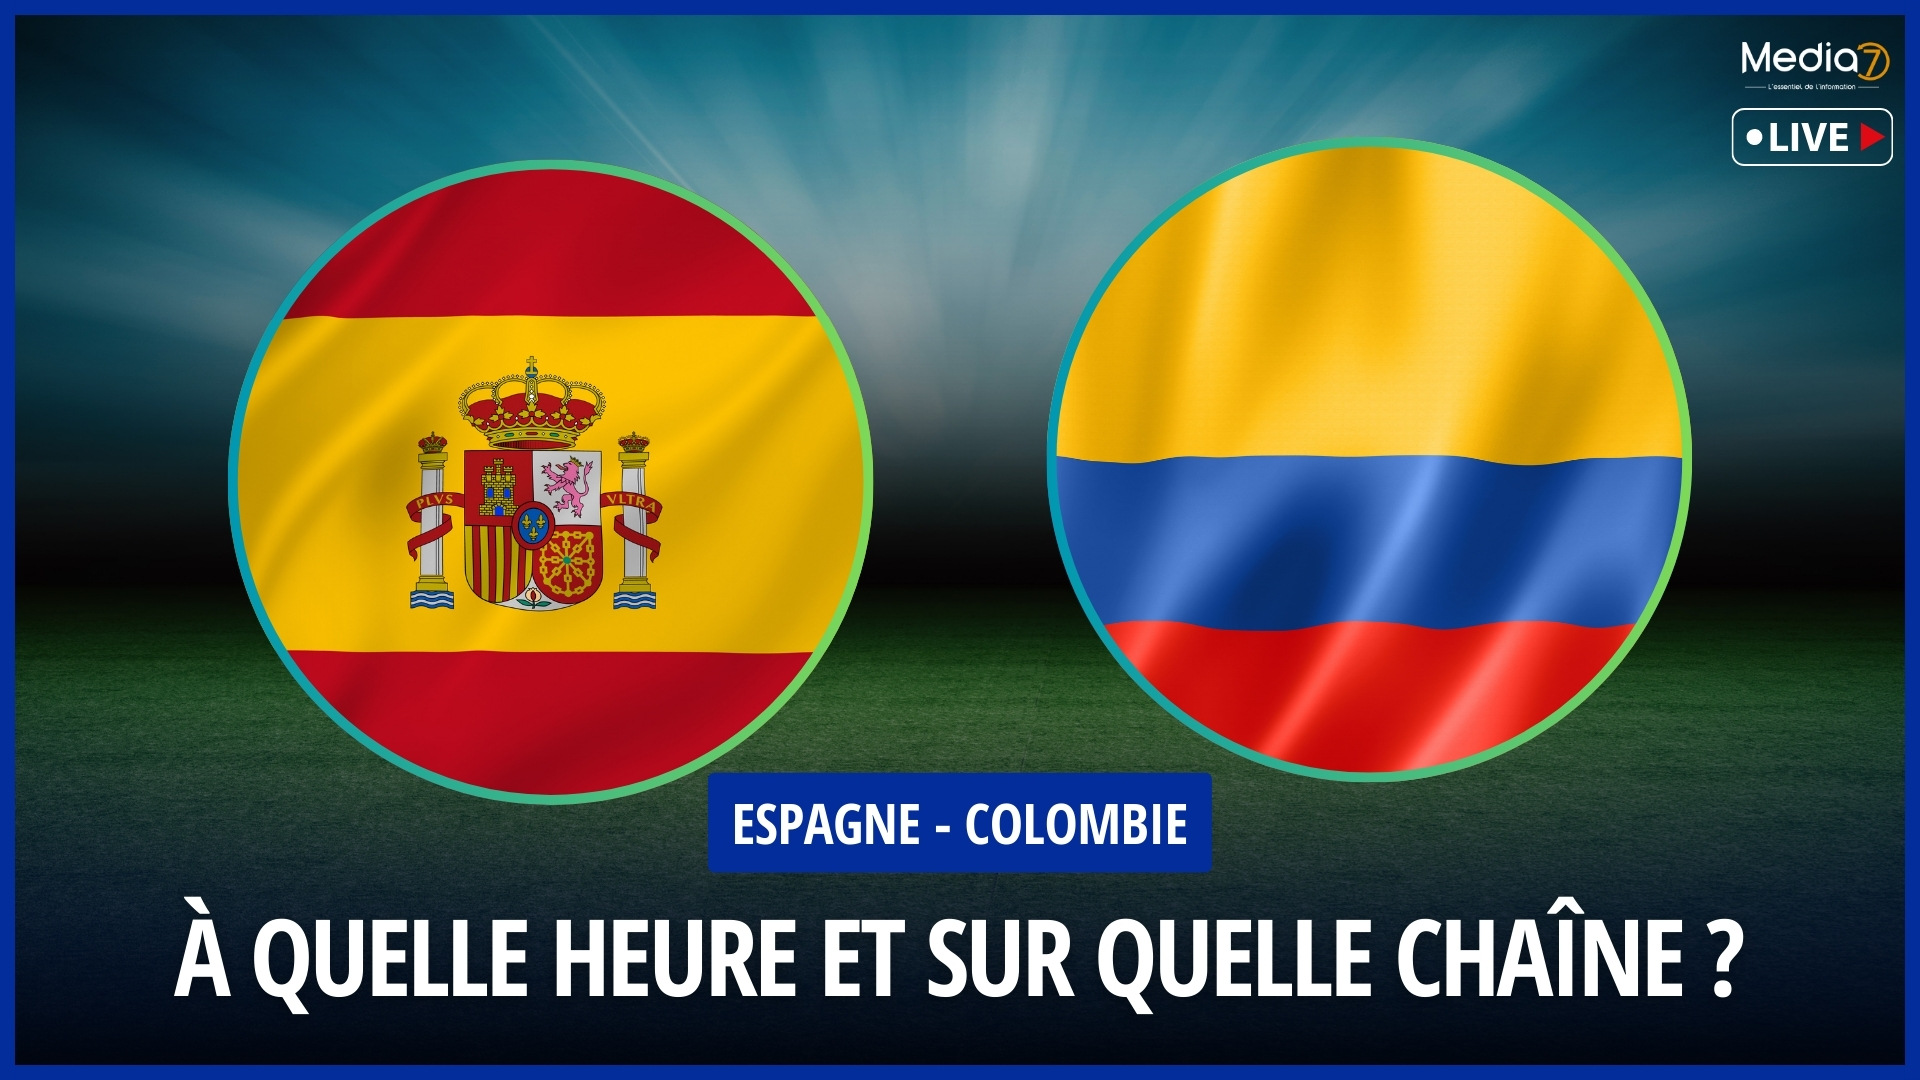 Spain - Colombia match live: Time, TV channel and Streaming - Media7